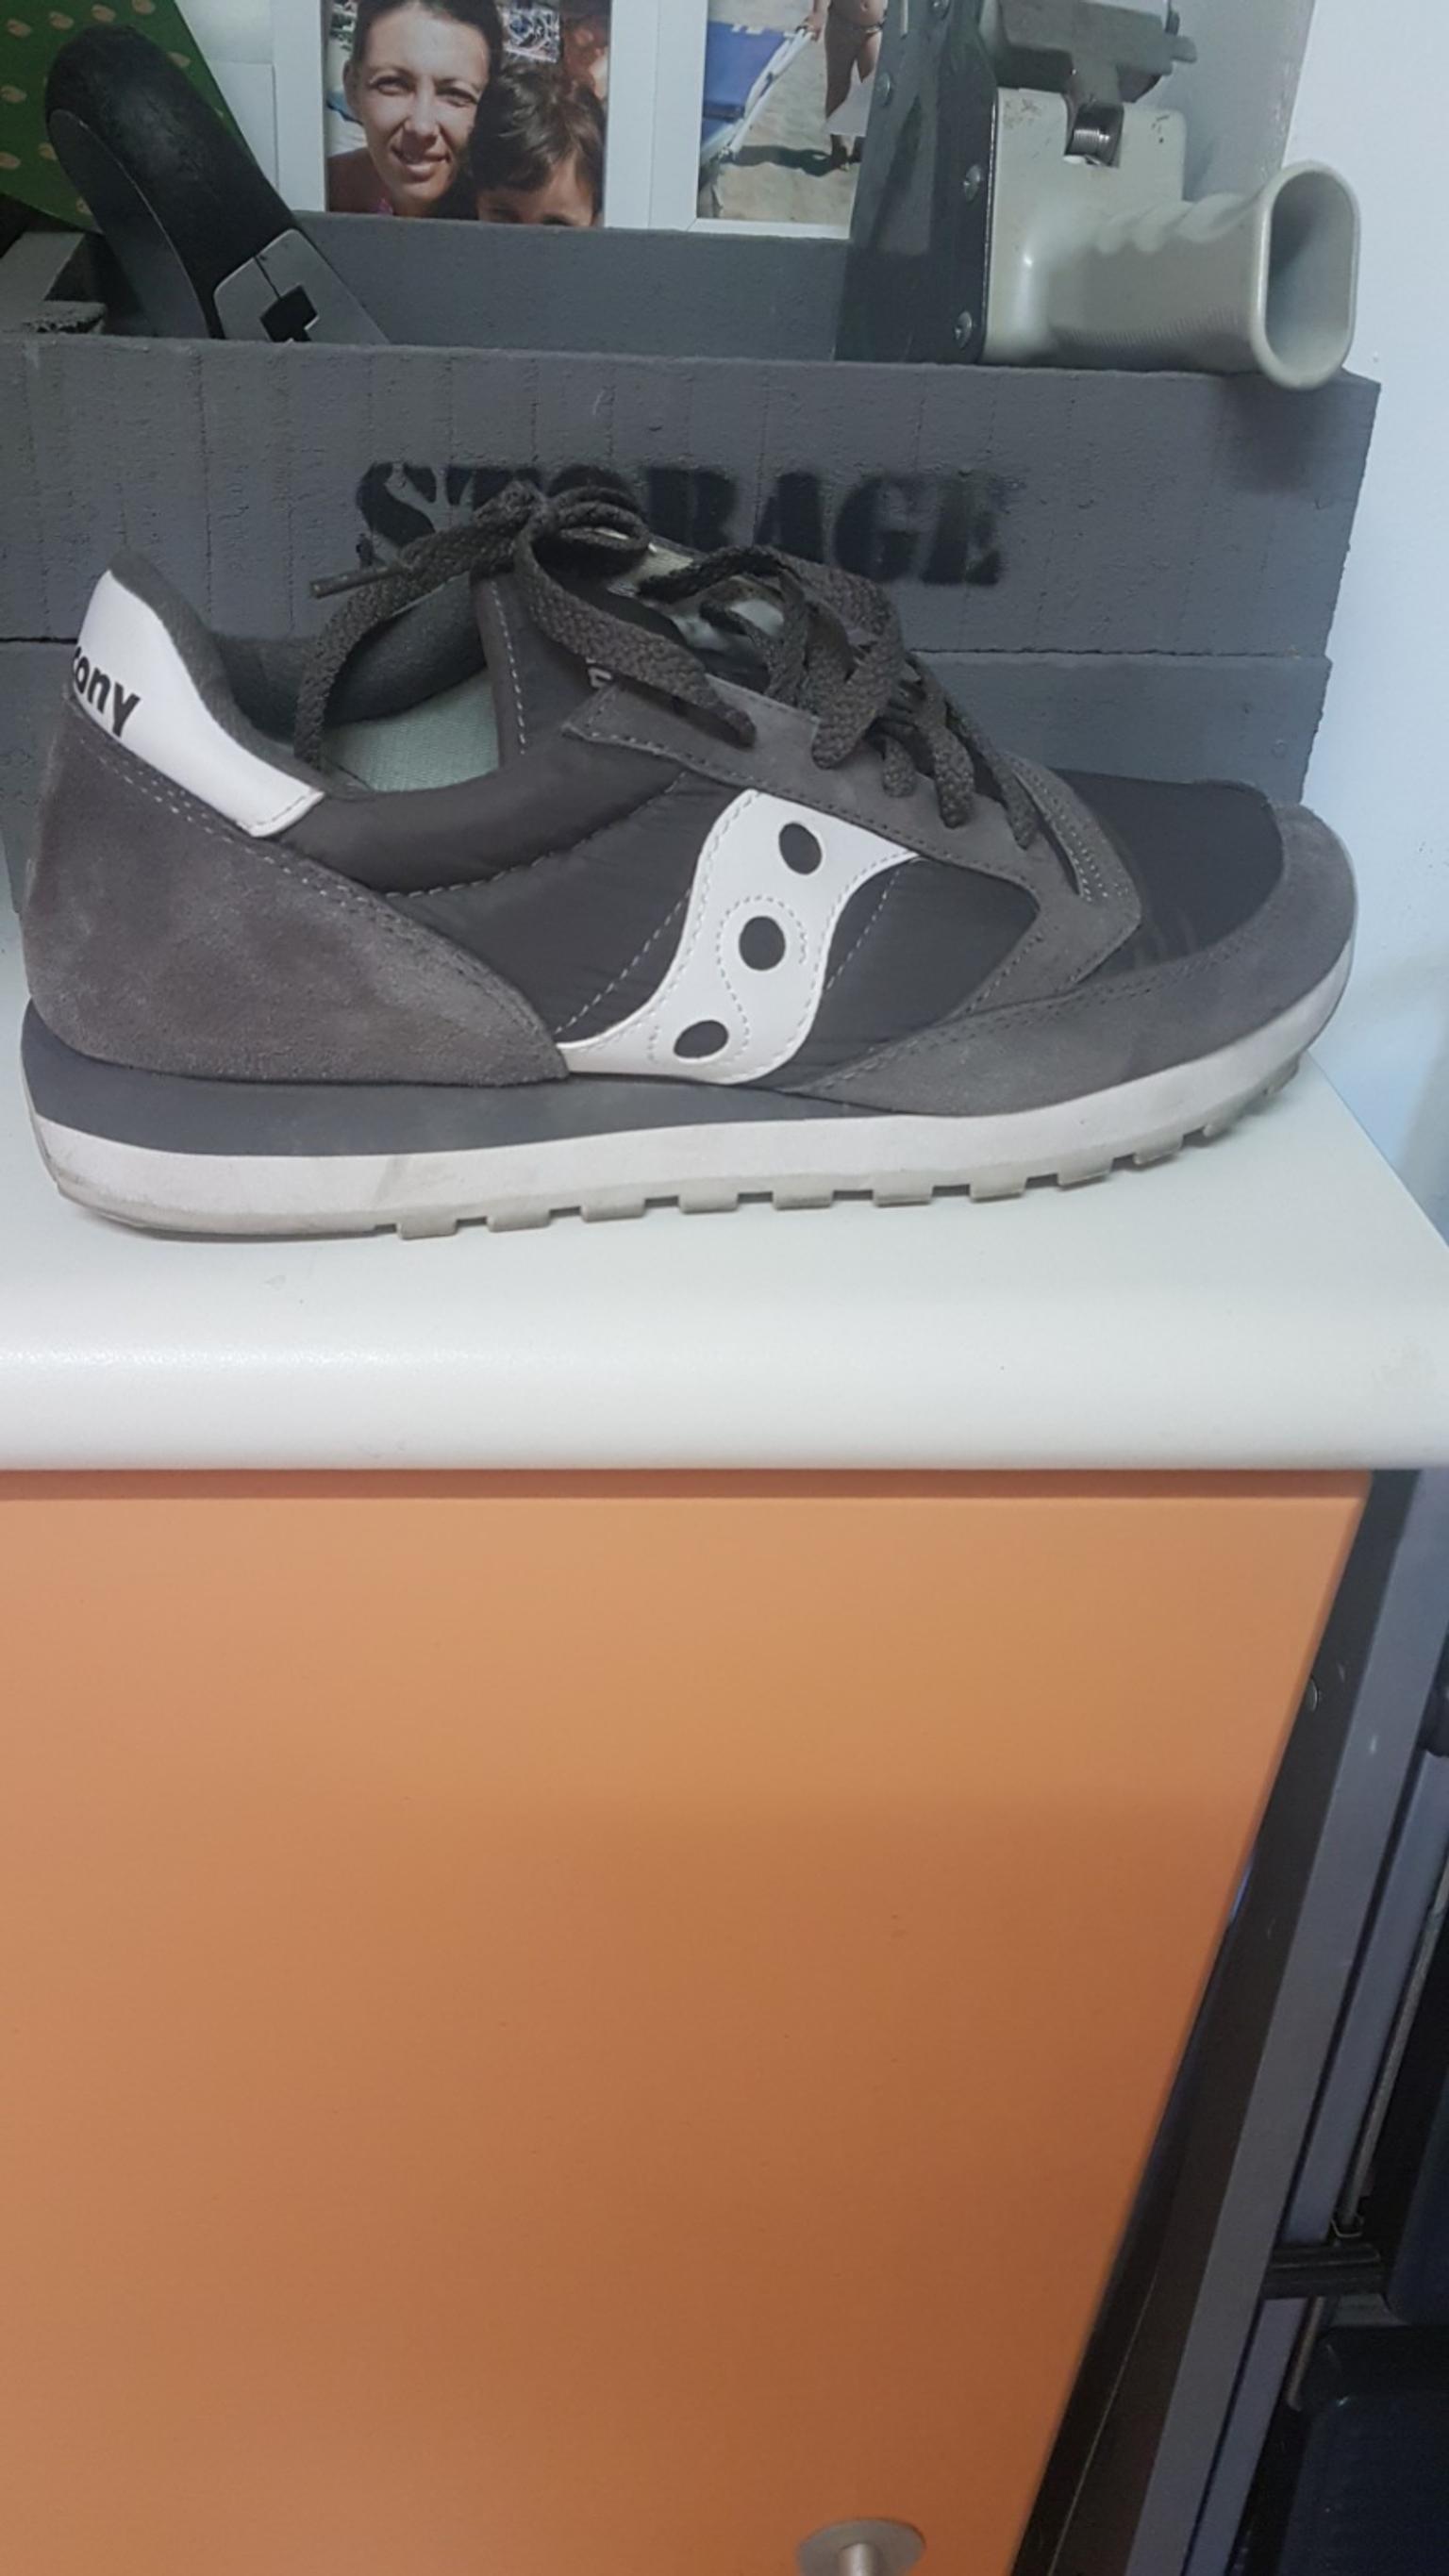 saucony jazz in 50013 Signa for €25.00 for sale | Shpock